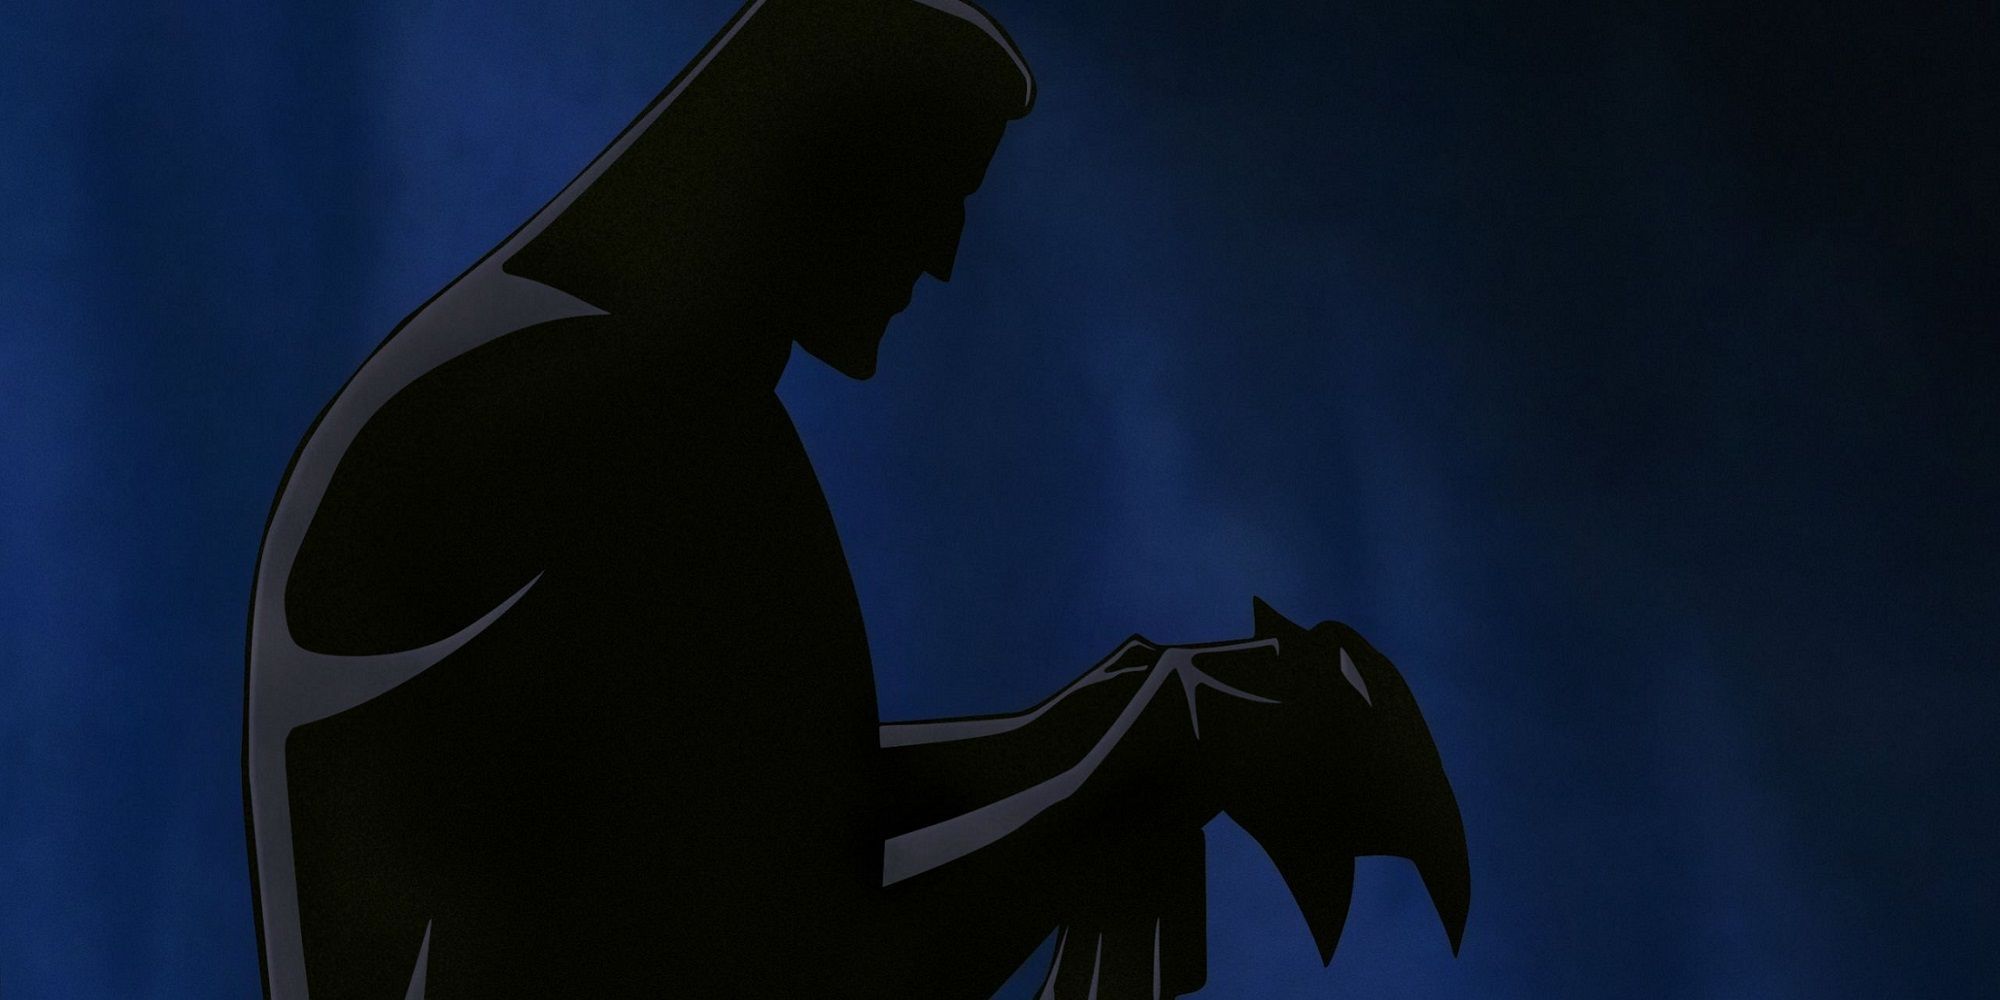 The silhouette of Bruce Wayne as he dons the Batman mantle for the first time.